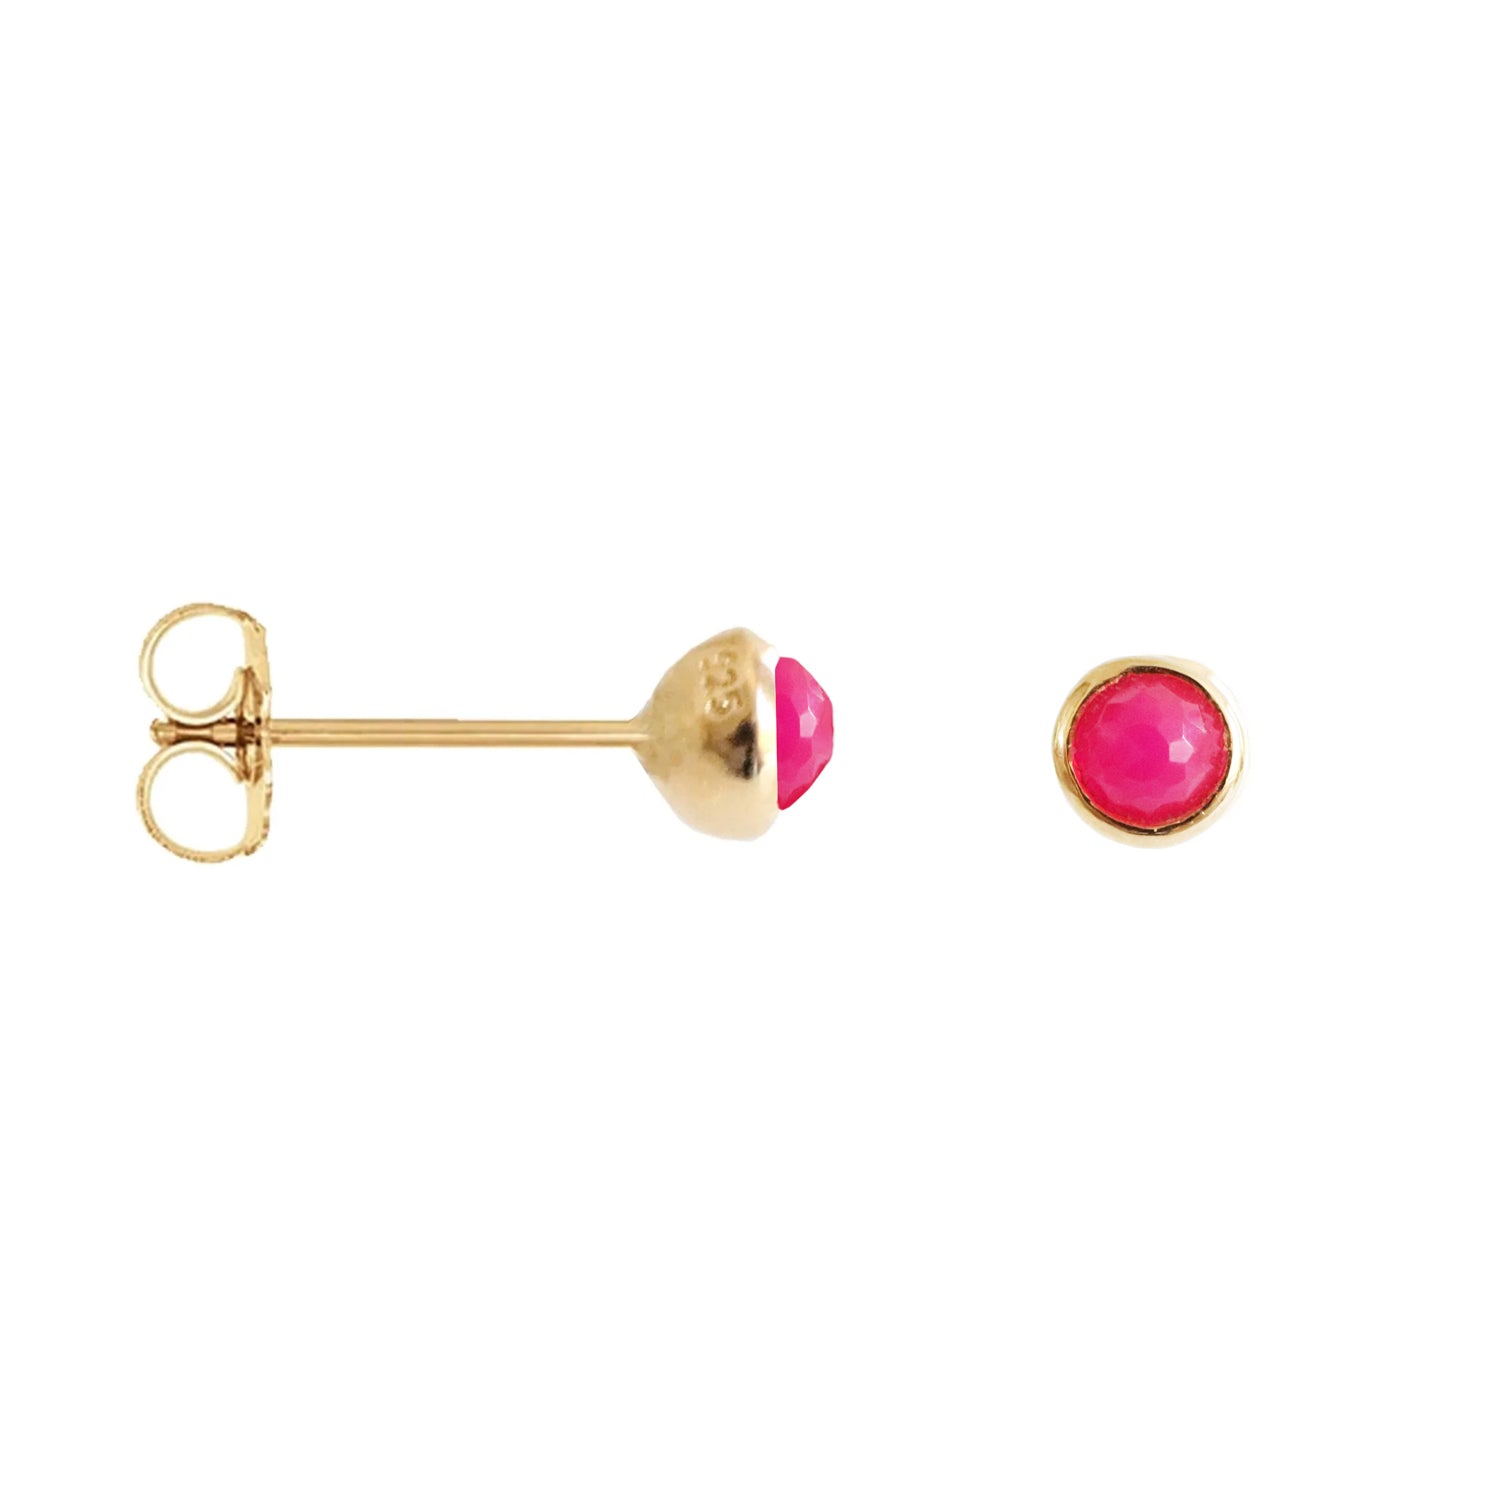 TINY PROTECT STUD EARRINGS - HOT PINK CHALCEDONY & GOLD - SO PRETTY CARA COTTER